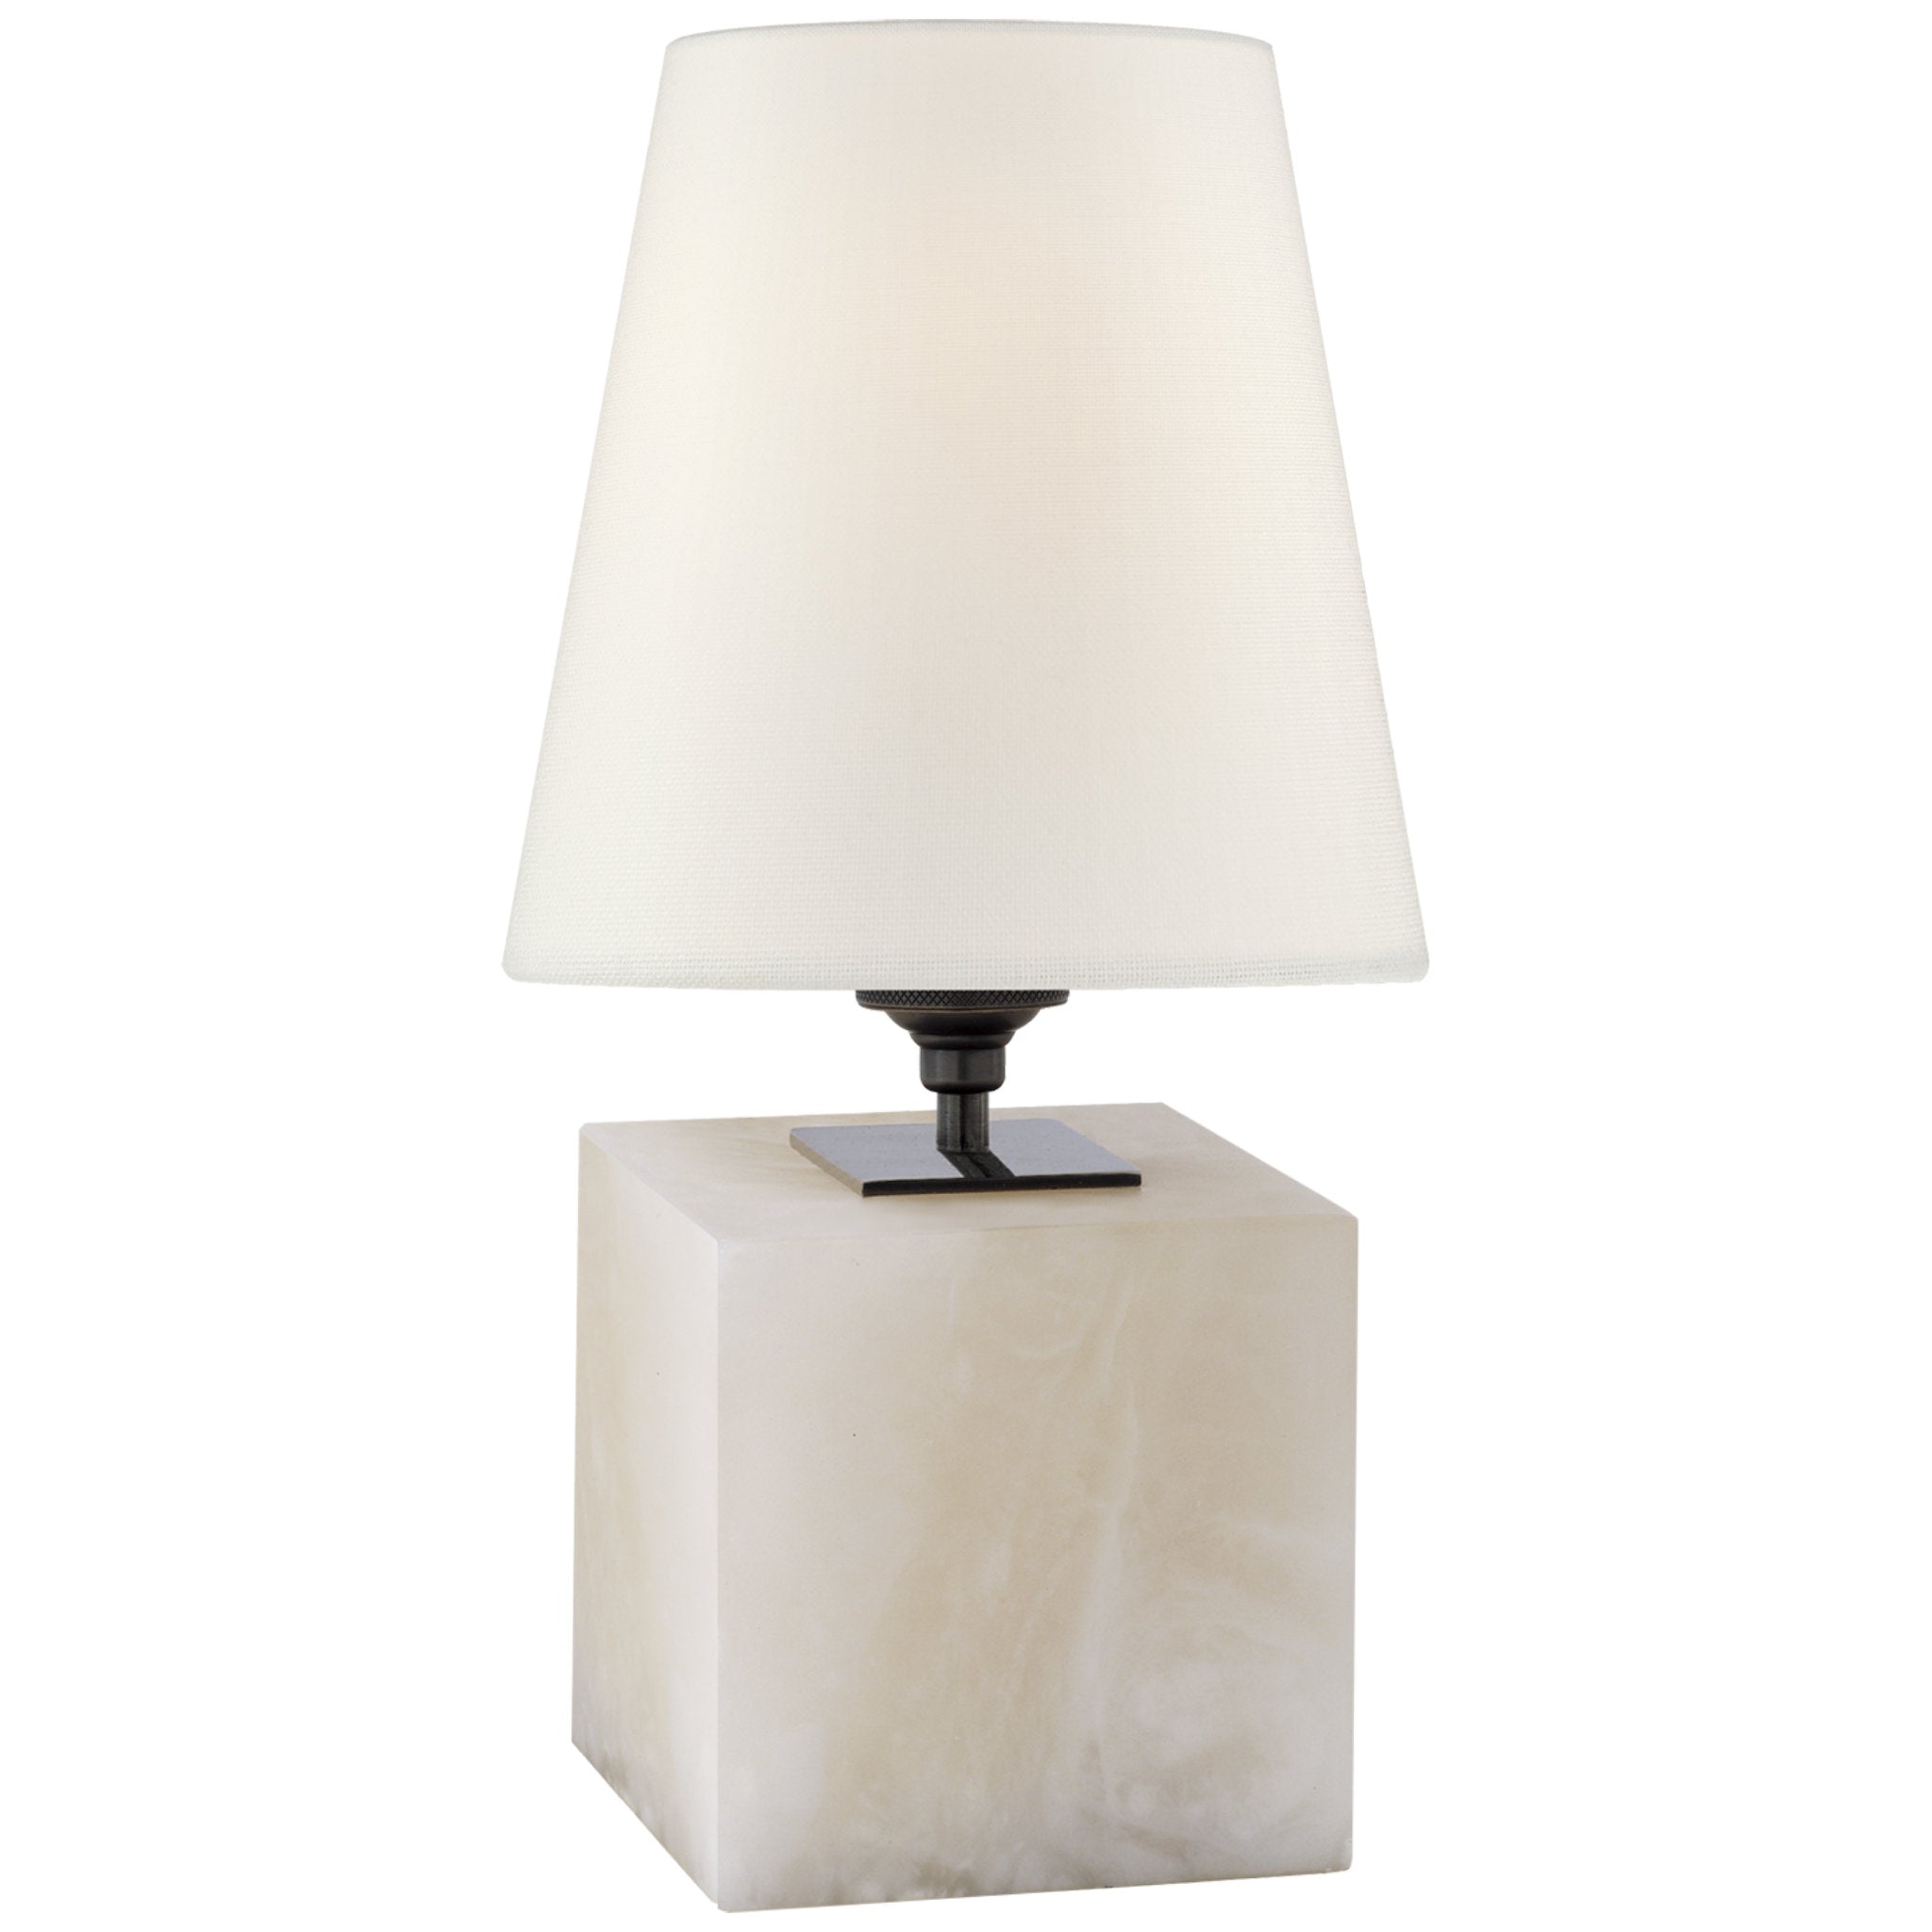 Thomas O'Brien Terri Cube Accent Lamp in Alabaster with Linen Shade